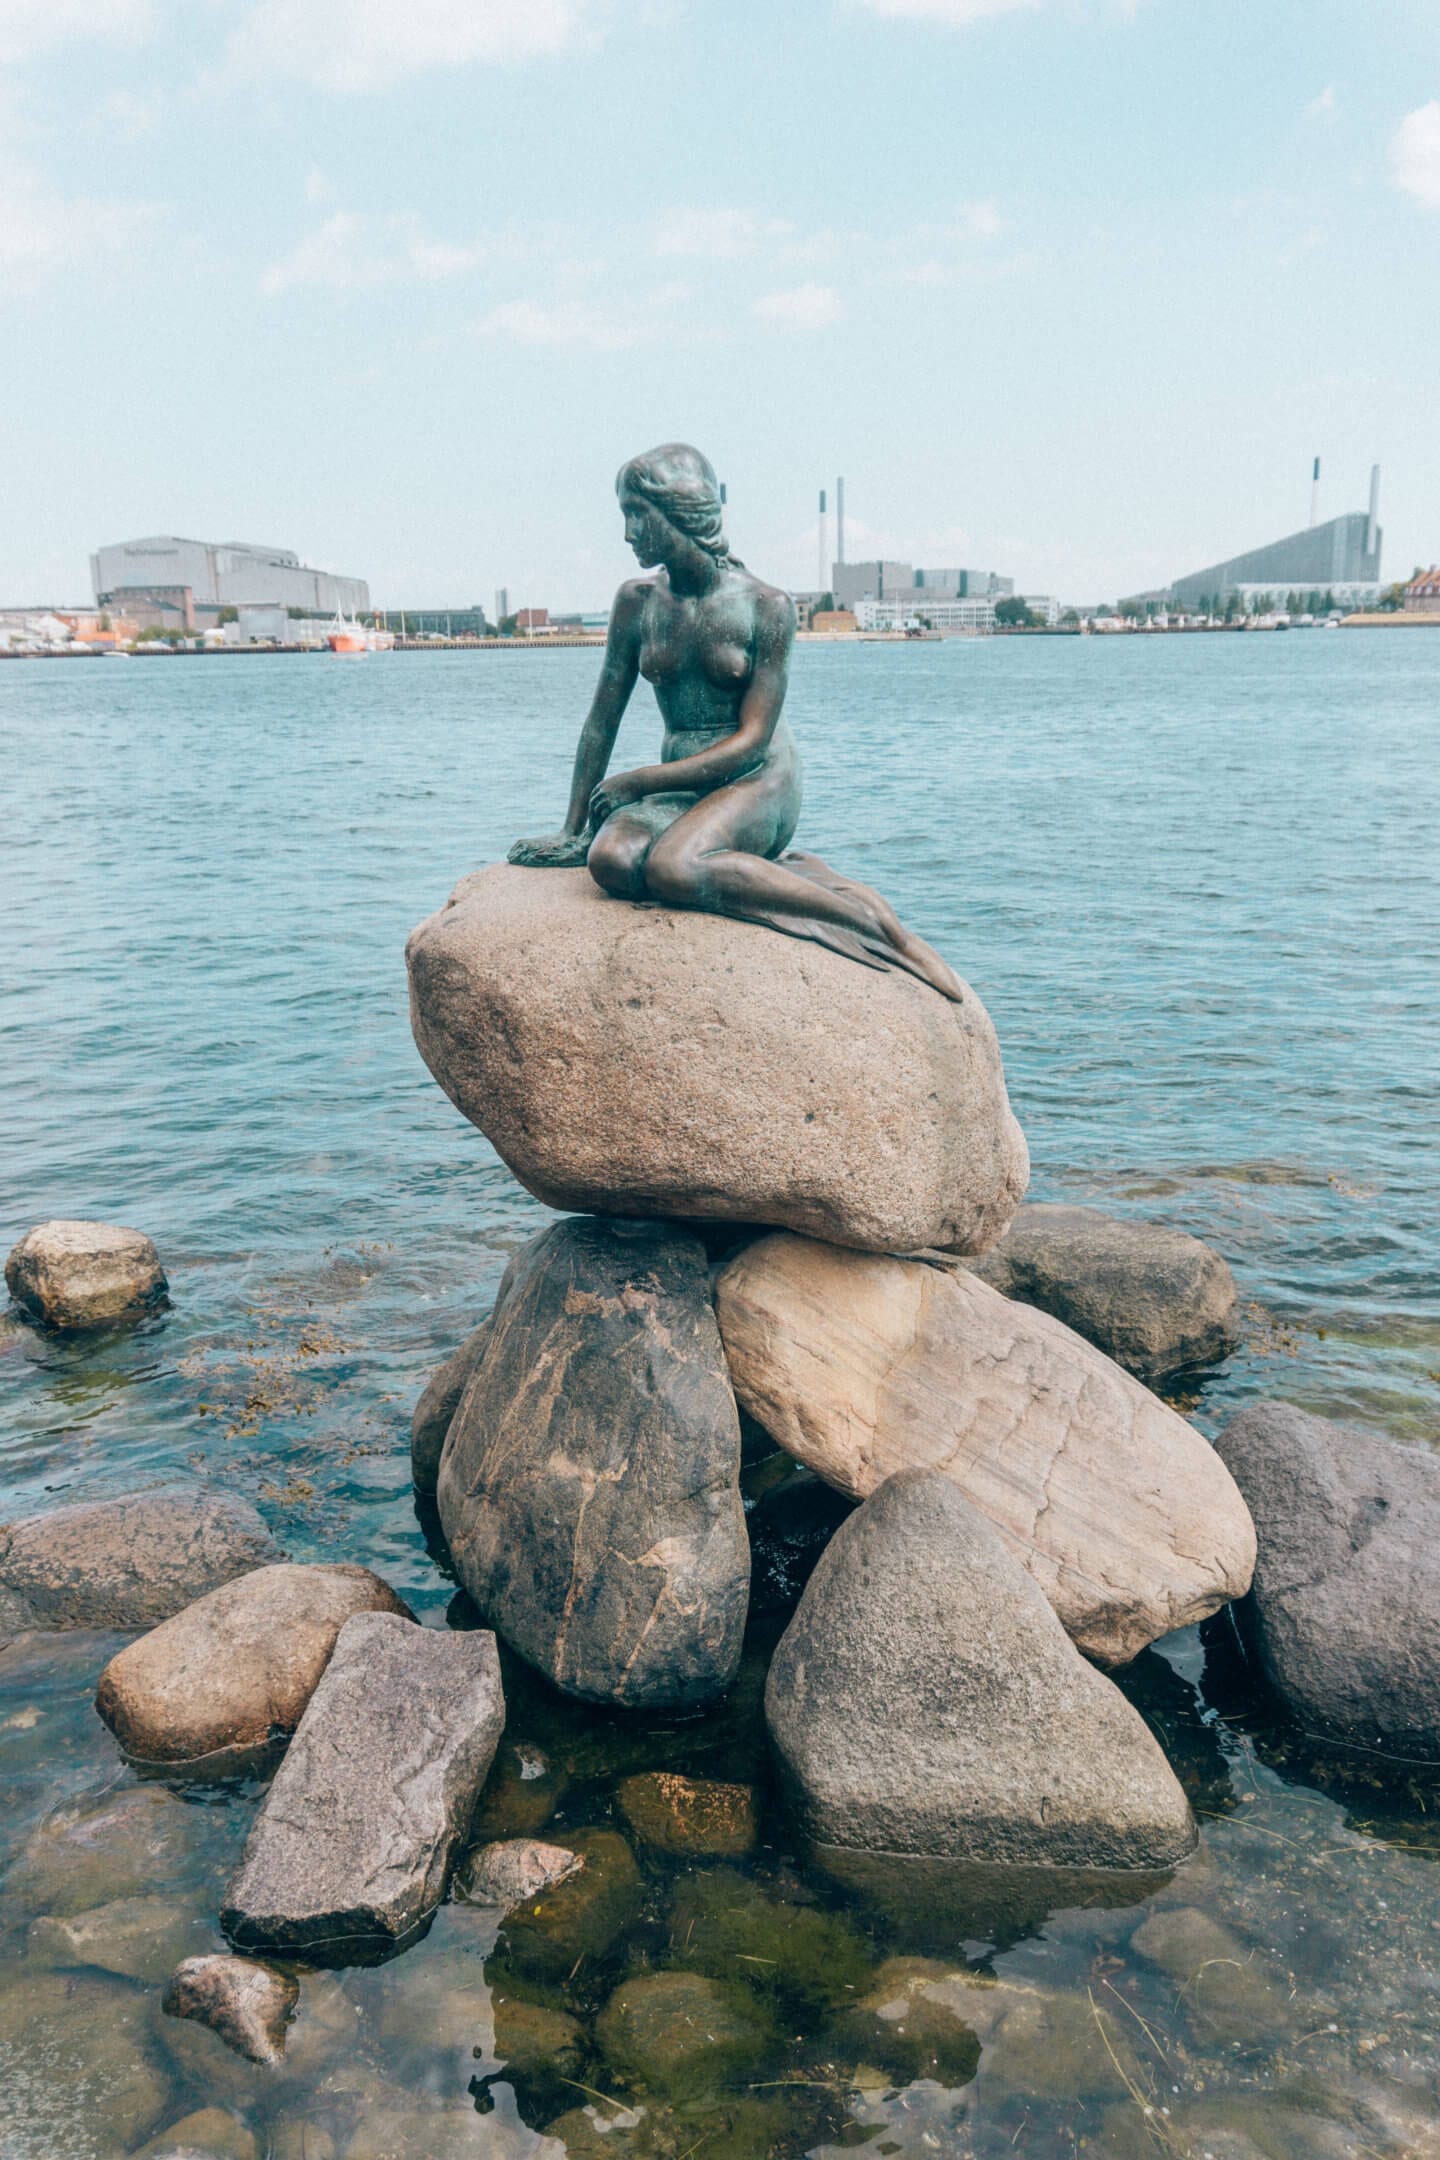 The 1913 iconic bronze statue of Hans Christian Andersen's character "The Little Mermaid" at the Langelinie promenade